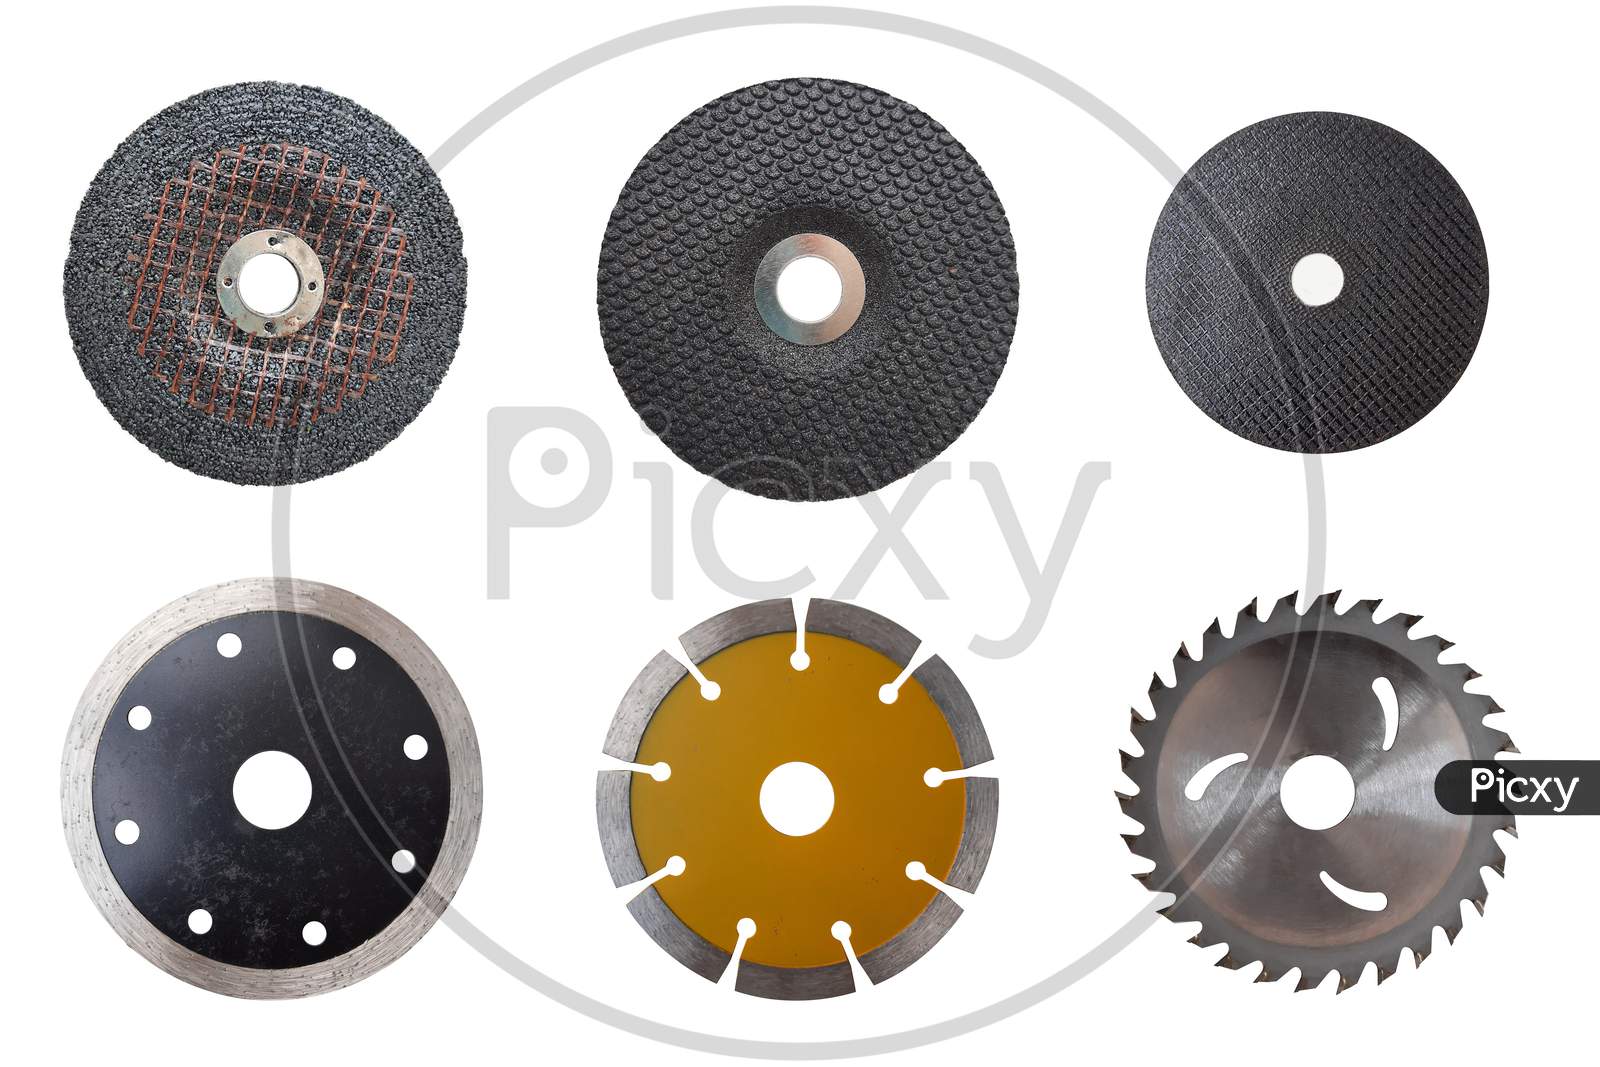 Electrical Cutting And Grinding Machine Circular Blades Isolated